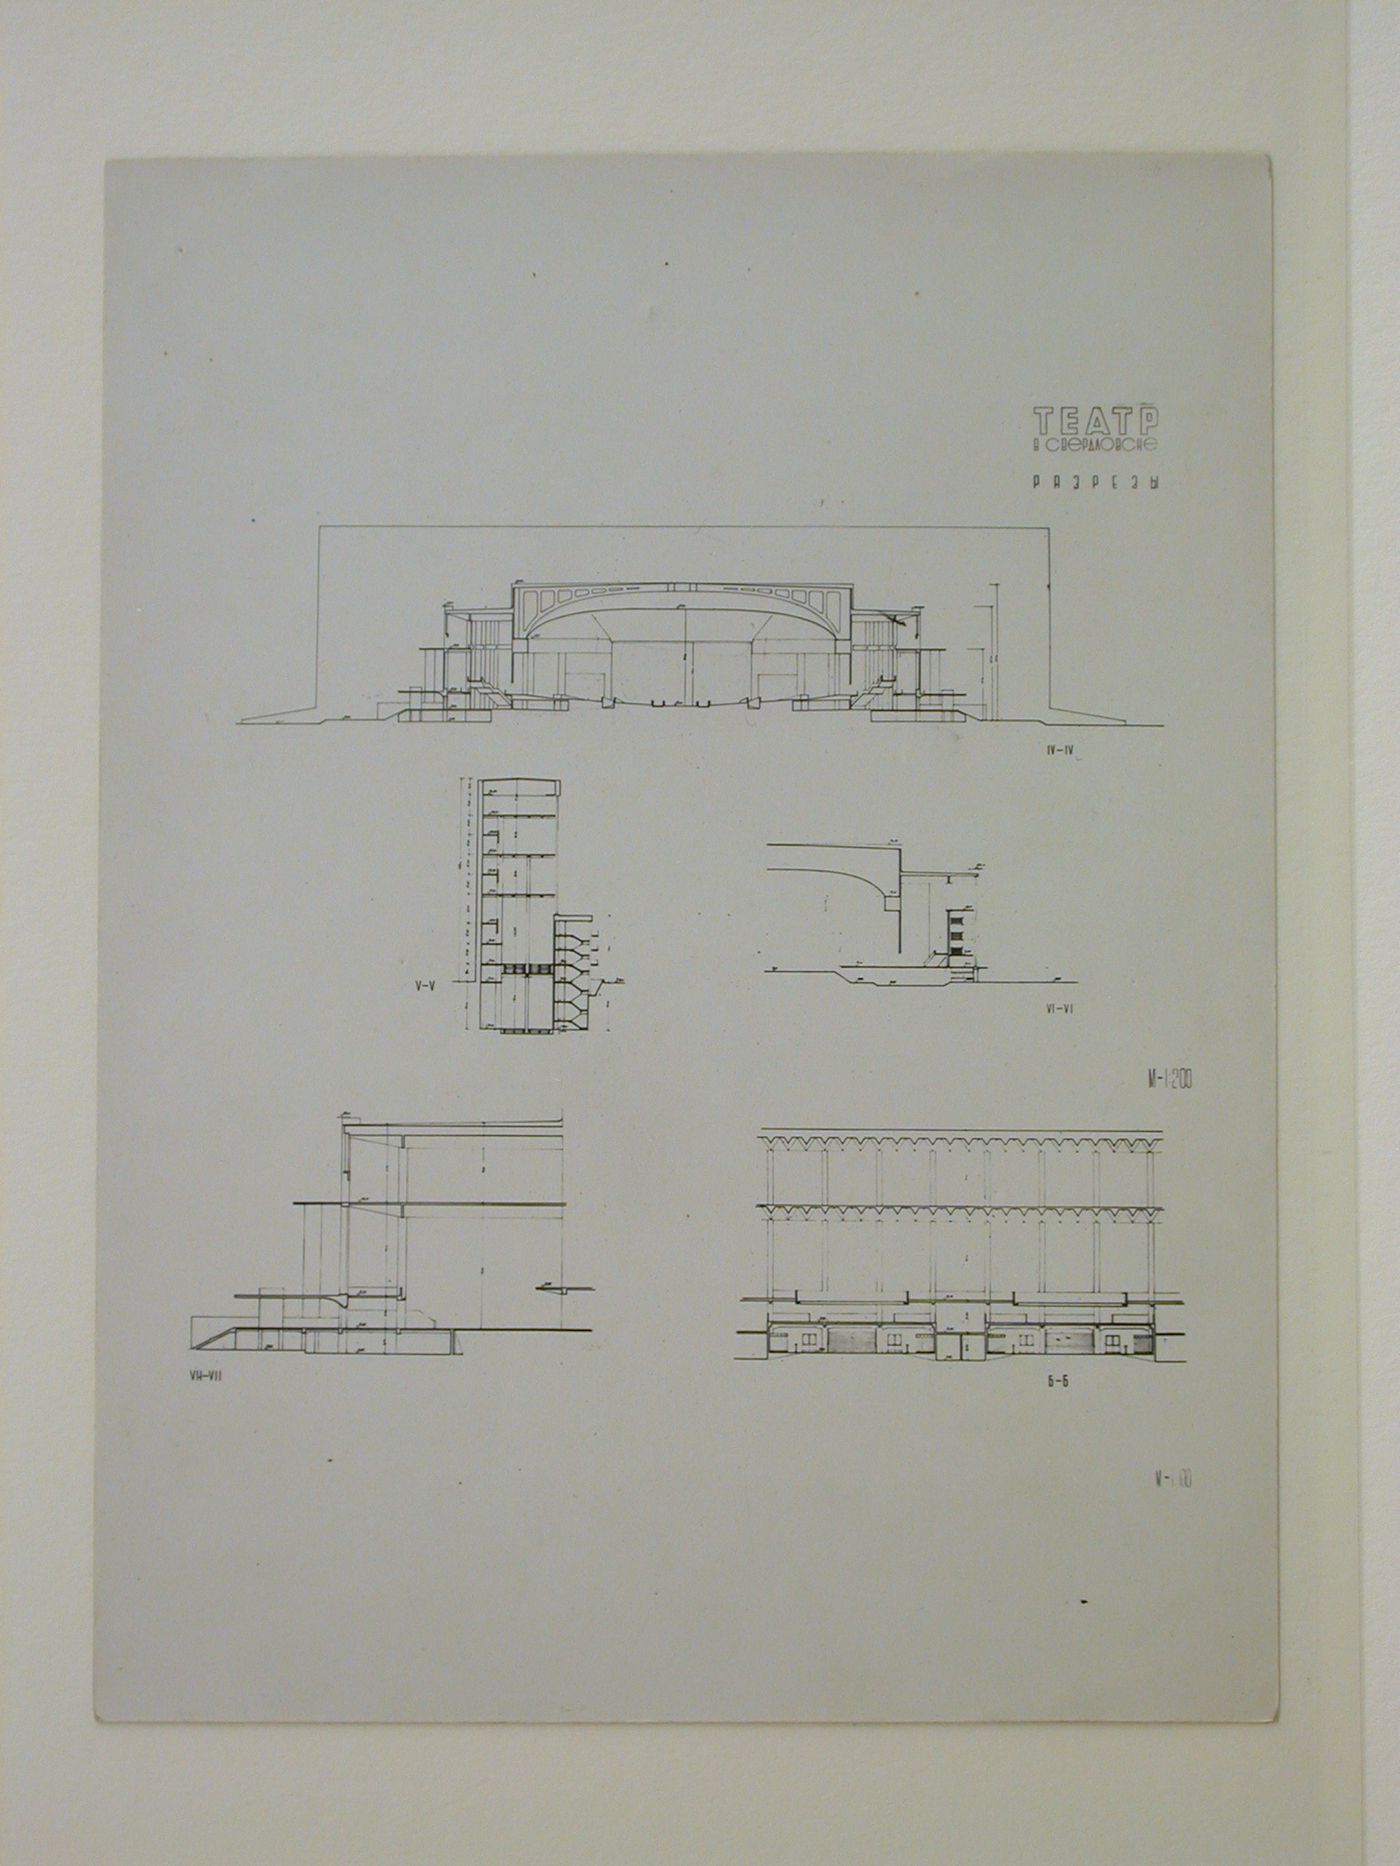 Photograph of sections for the final round of competition for a "synthetic theater" in Sverdlovsk, Soviet Union (now Ekaterinburg, Russia)